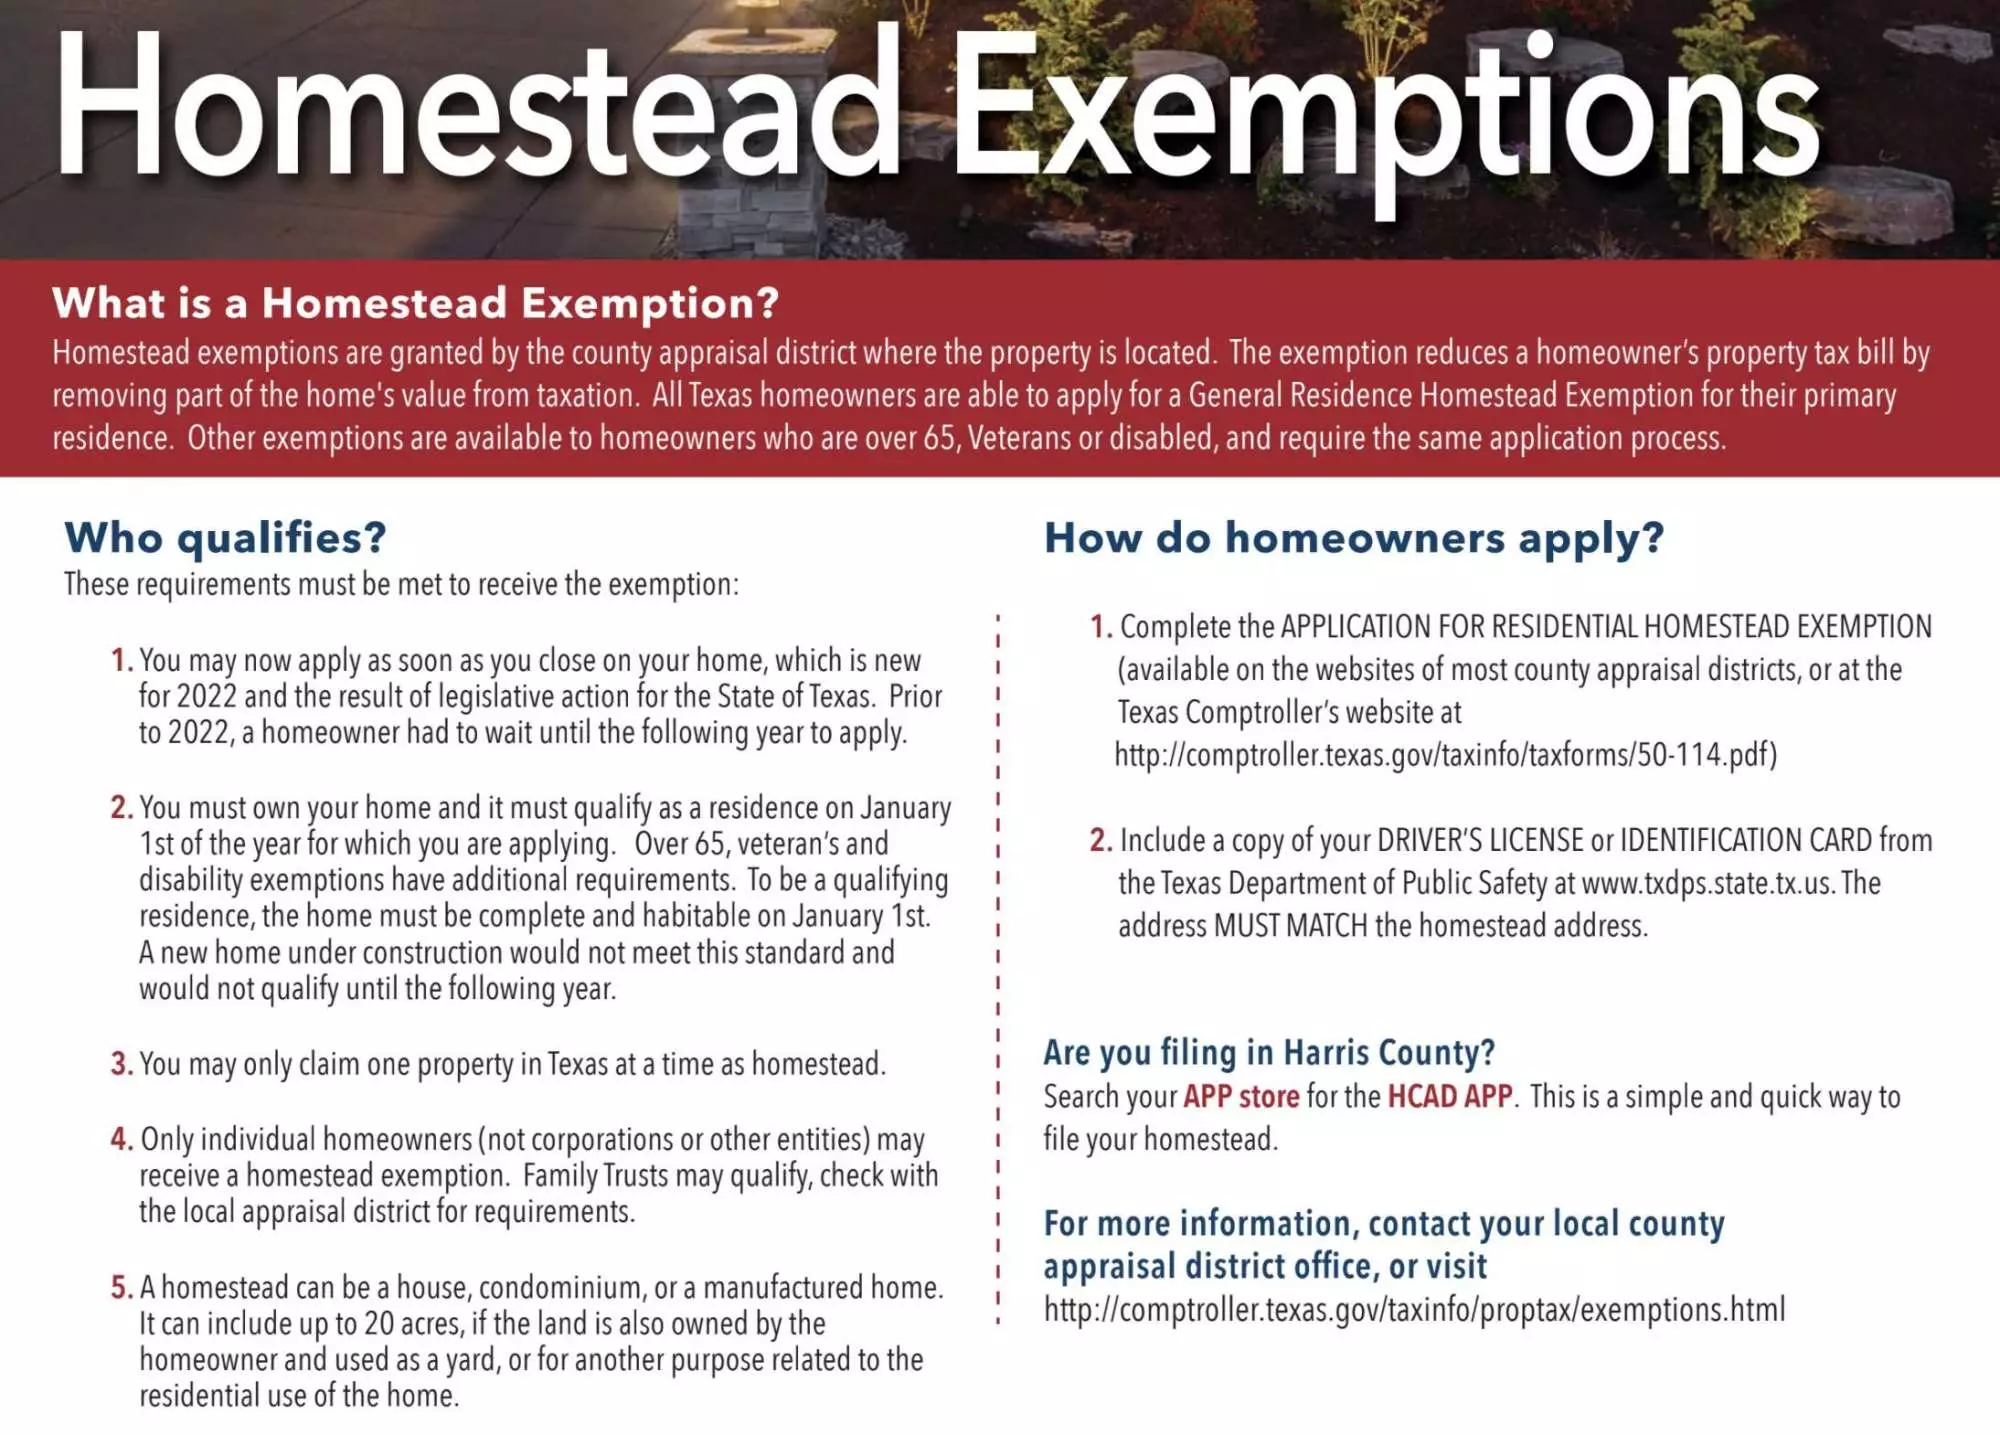 california-s-new-homestead-exemption-law-the-fullman-firm